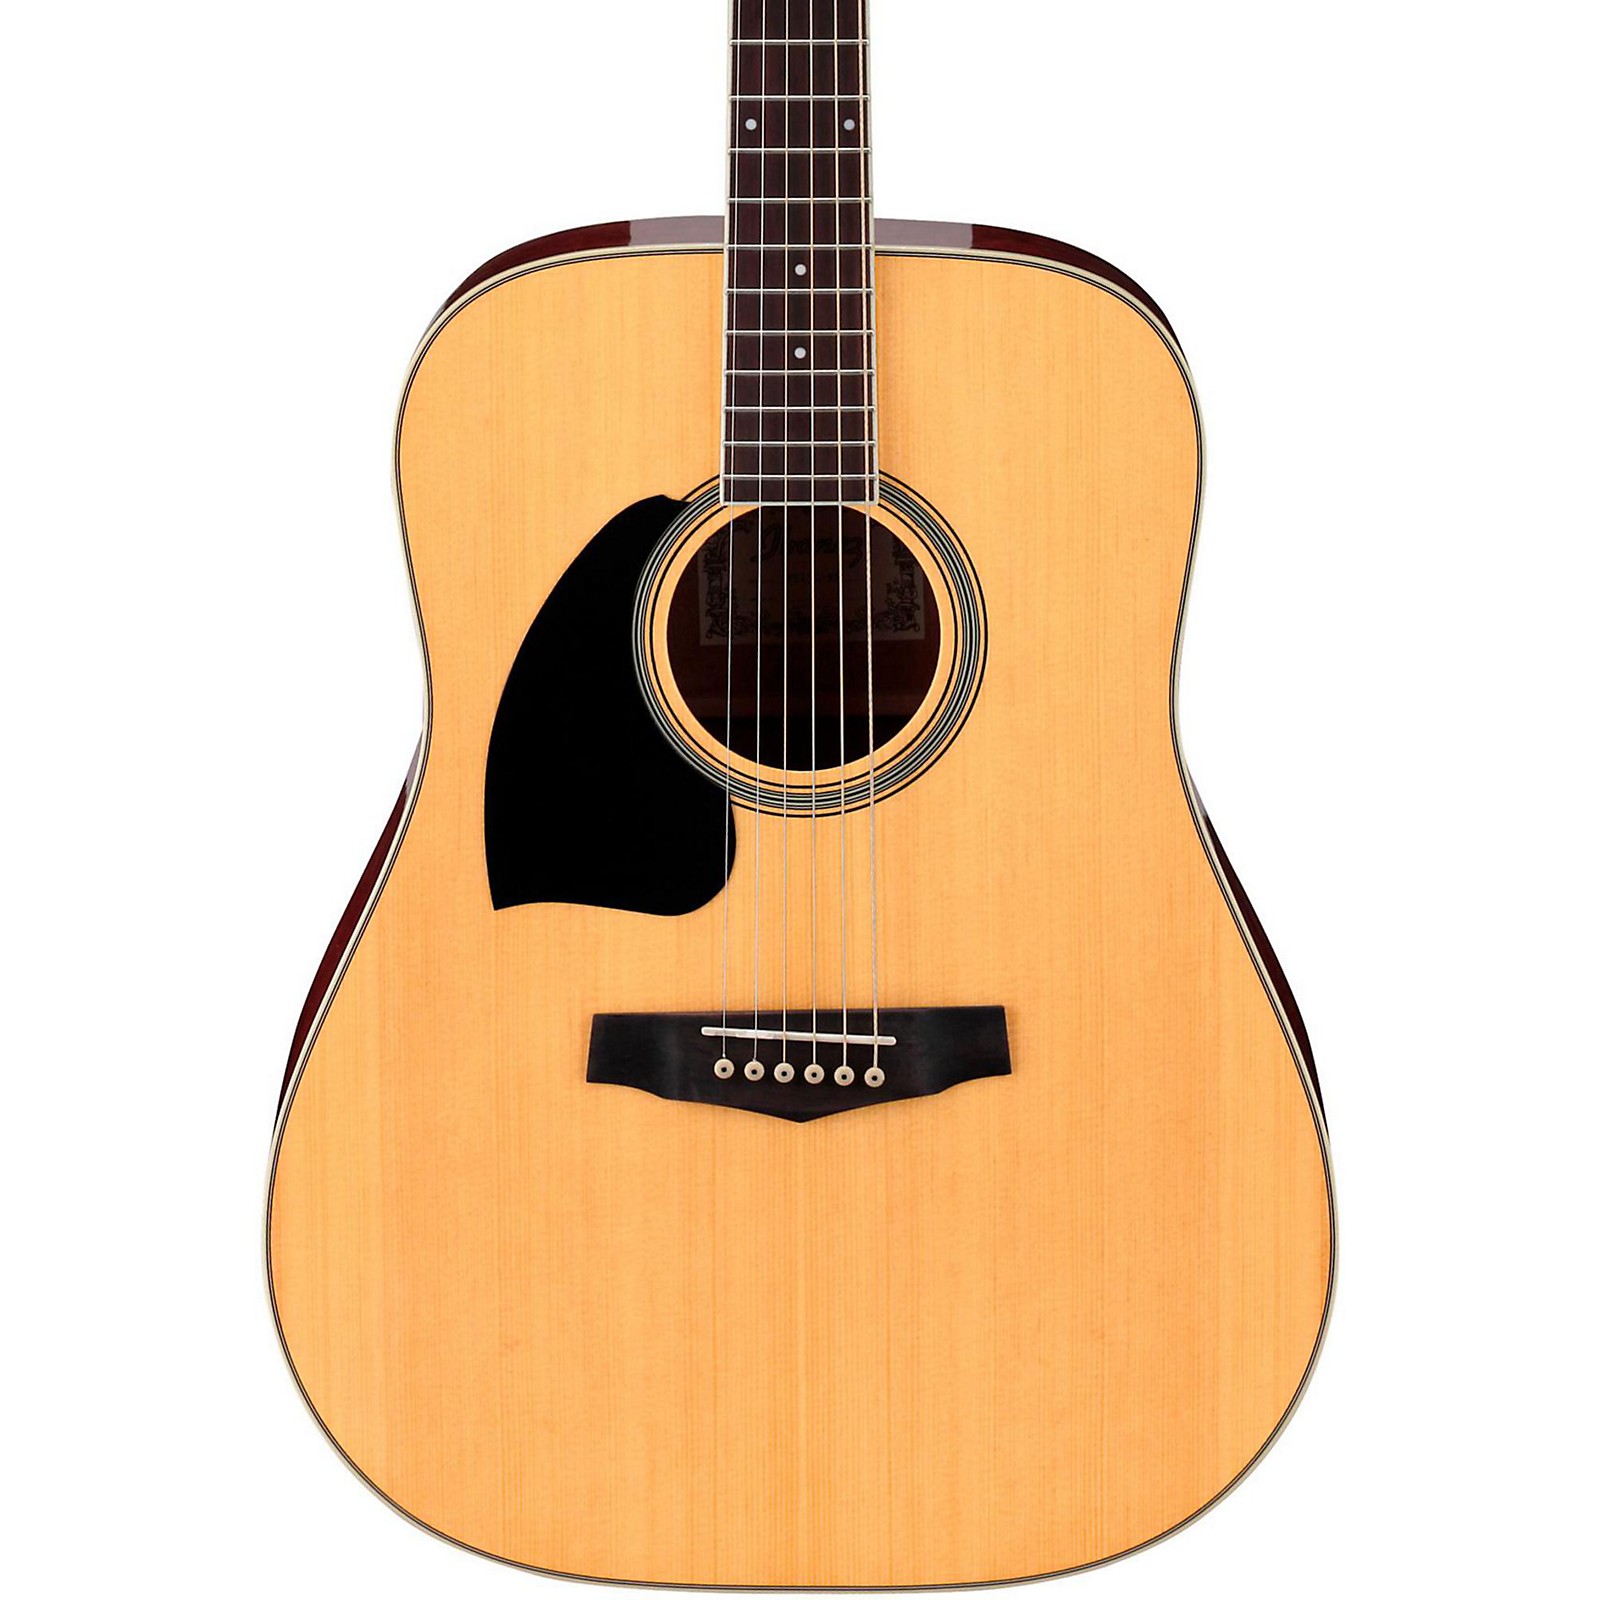 Democratie Festival Microbe Ibanez Performance Series PF15 Left-Handed Dreadnought Acoustic Guitar |  Music & Arts